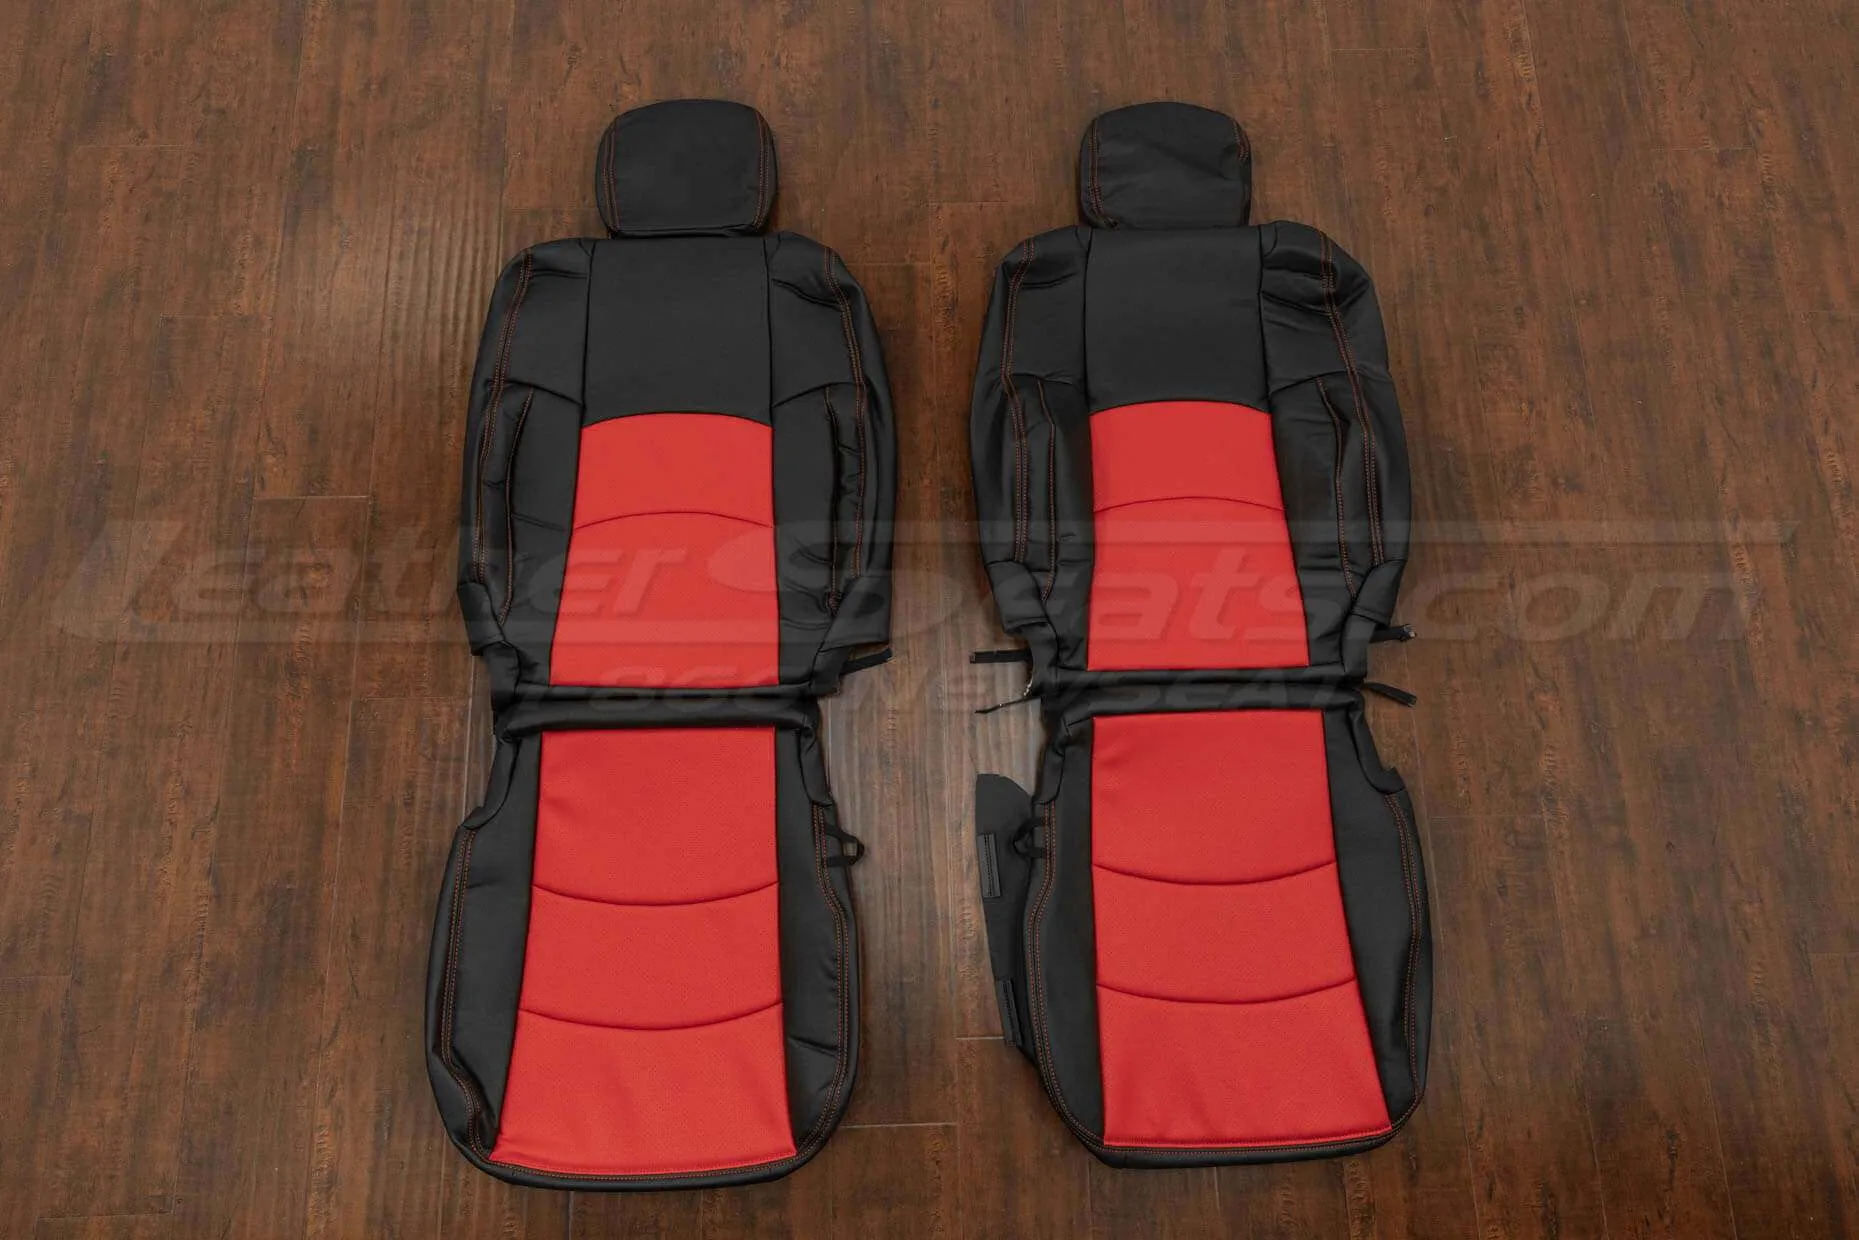 Dodge Ram Leather Seat Kit - Black & Bright Red - Front seat upholstery